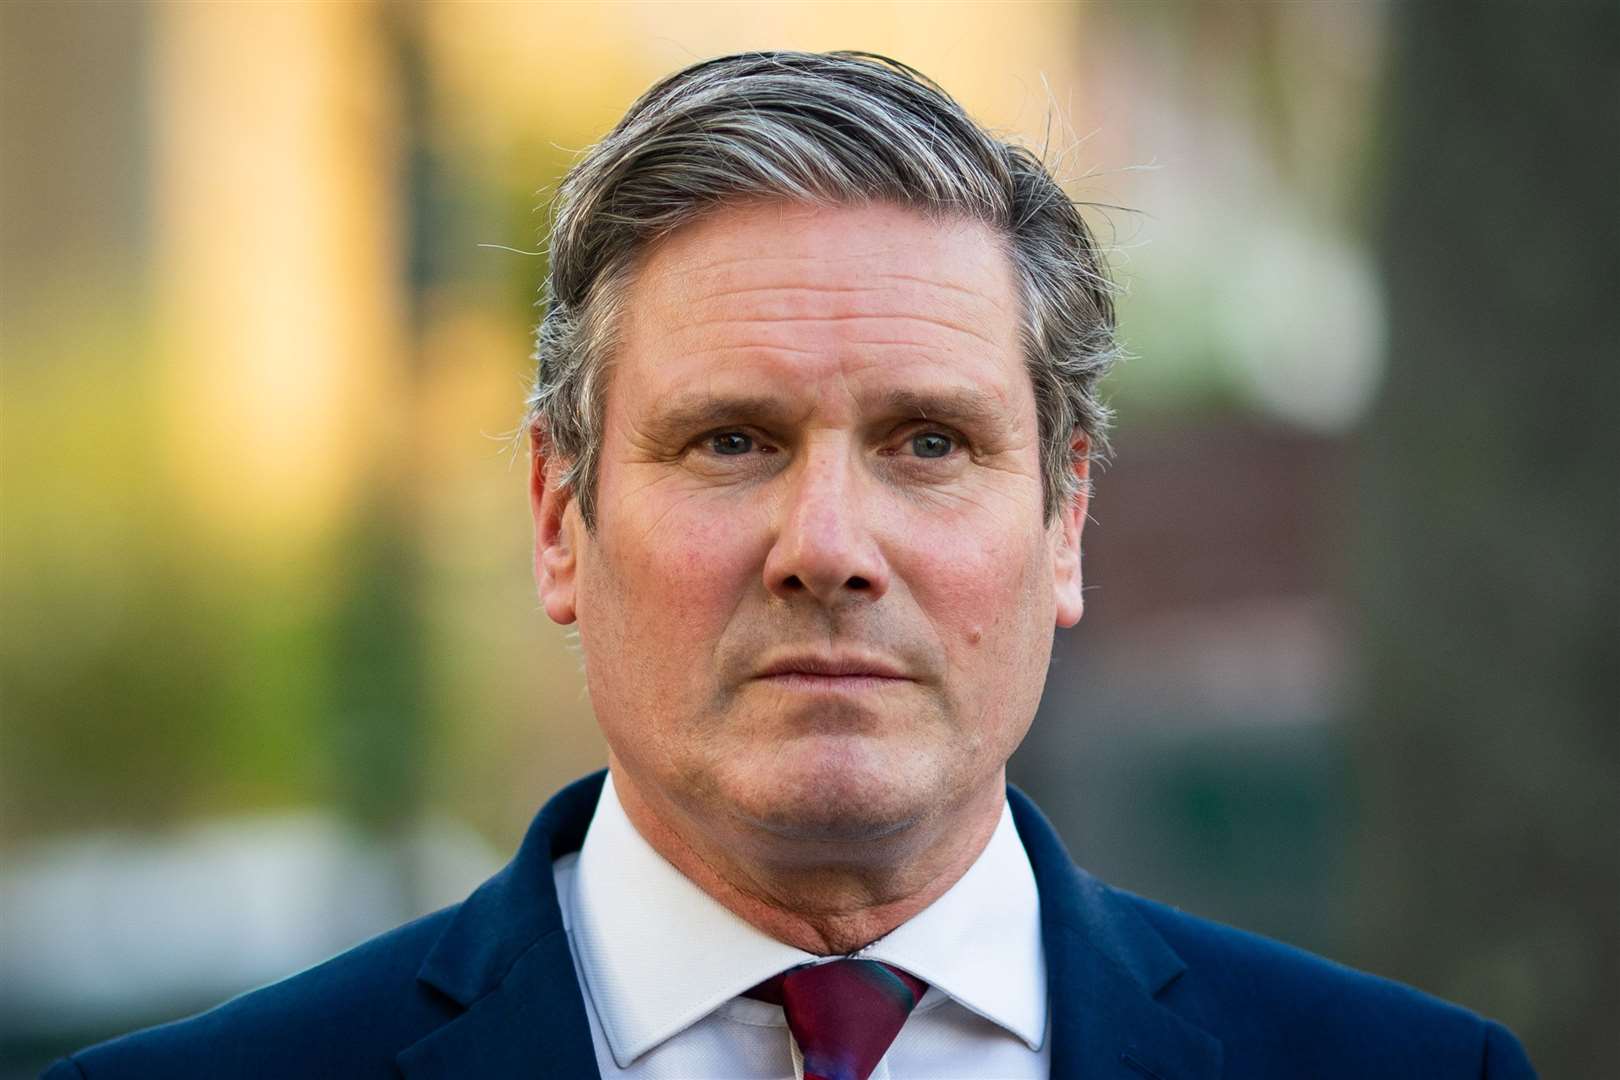 Labour leader Keir Starmer wants to see a ban on smacking in England